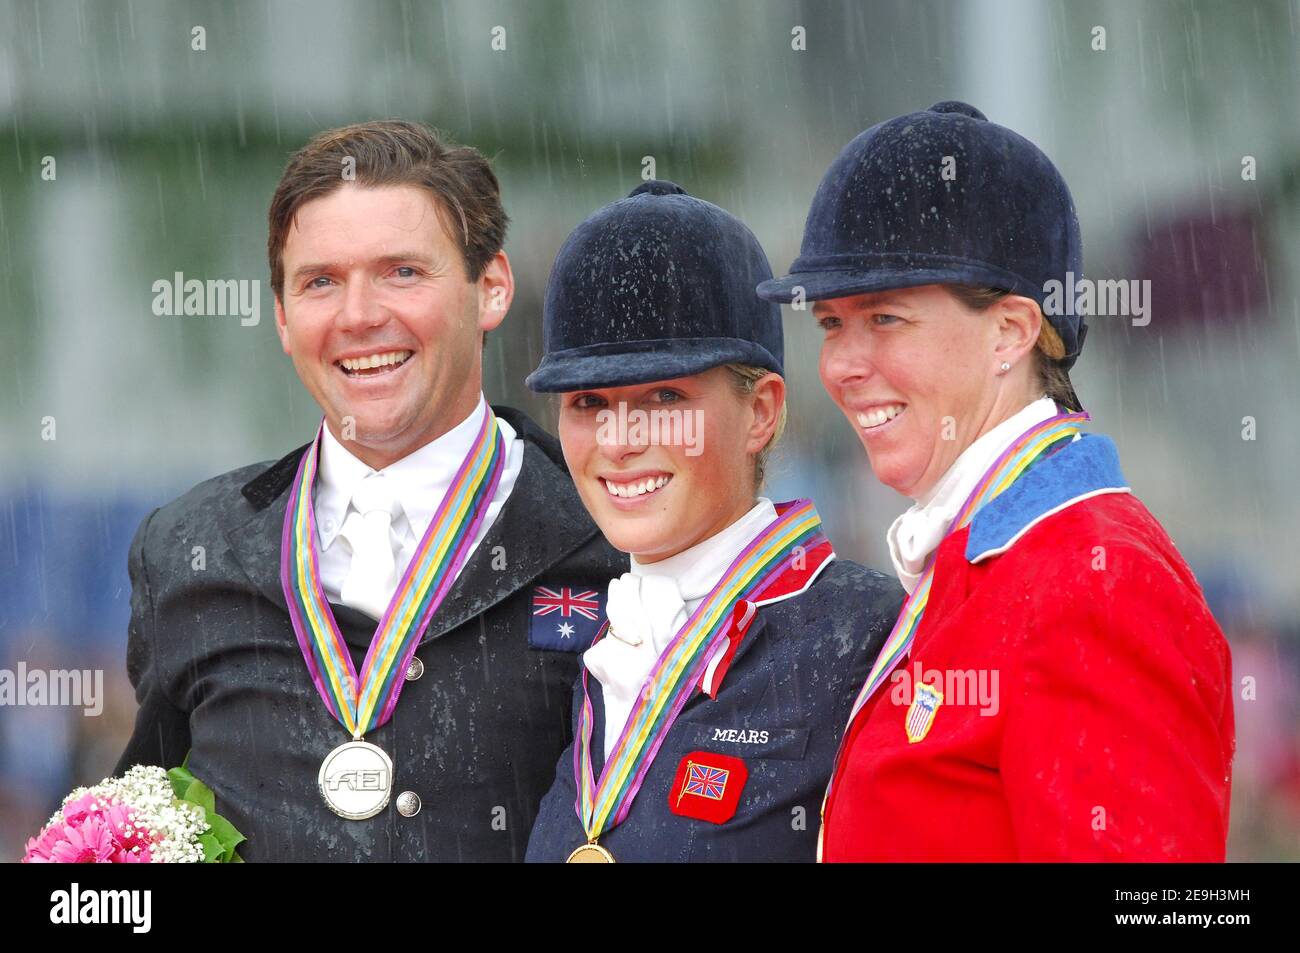 (L-R) Australia's Clayton Fredericks silver medal, Great Britain's Zara Pillips individual gold medal and silver team medal, USA's Amy Tryon bronze medal during the awarding ceremony of the Eventing individual competition of the World Equestrian Games in Aachen, Germany on August 27, 2006. Photo by Edwin Cook/Cameleon/ABACAPRESS.COM Stock Photo